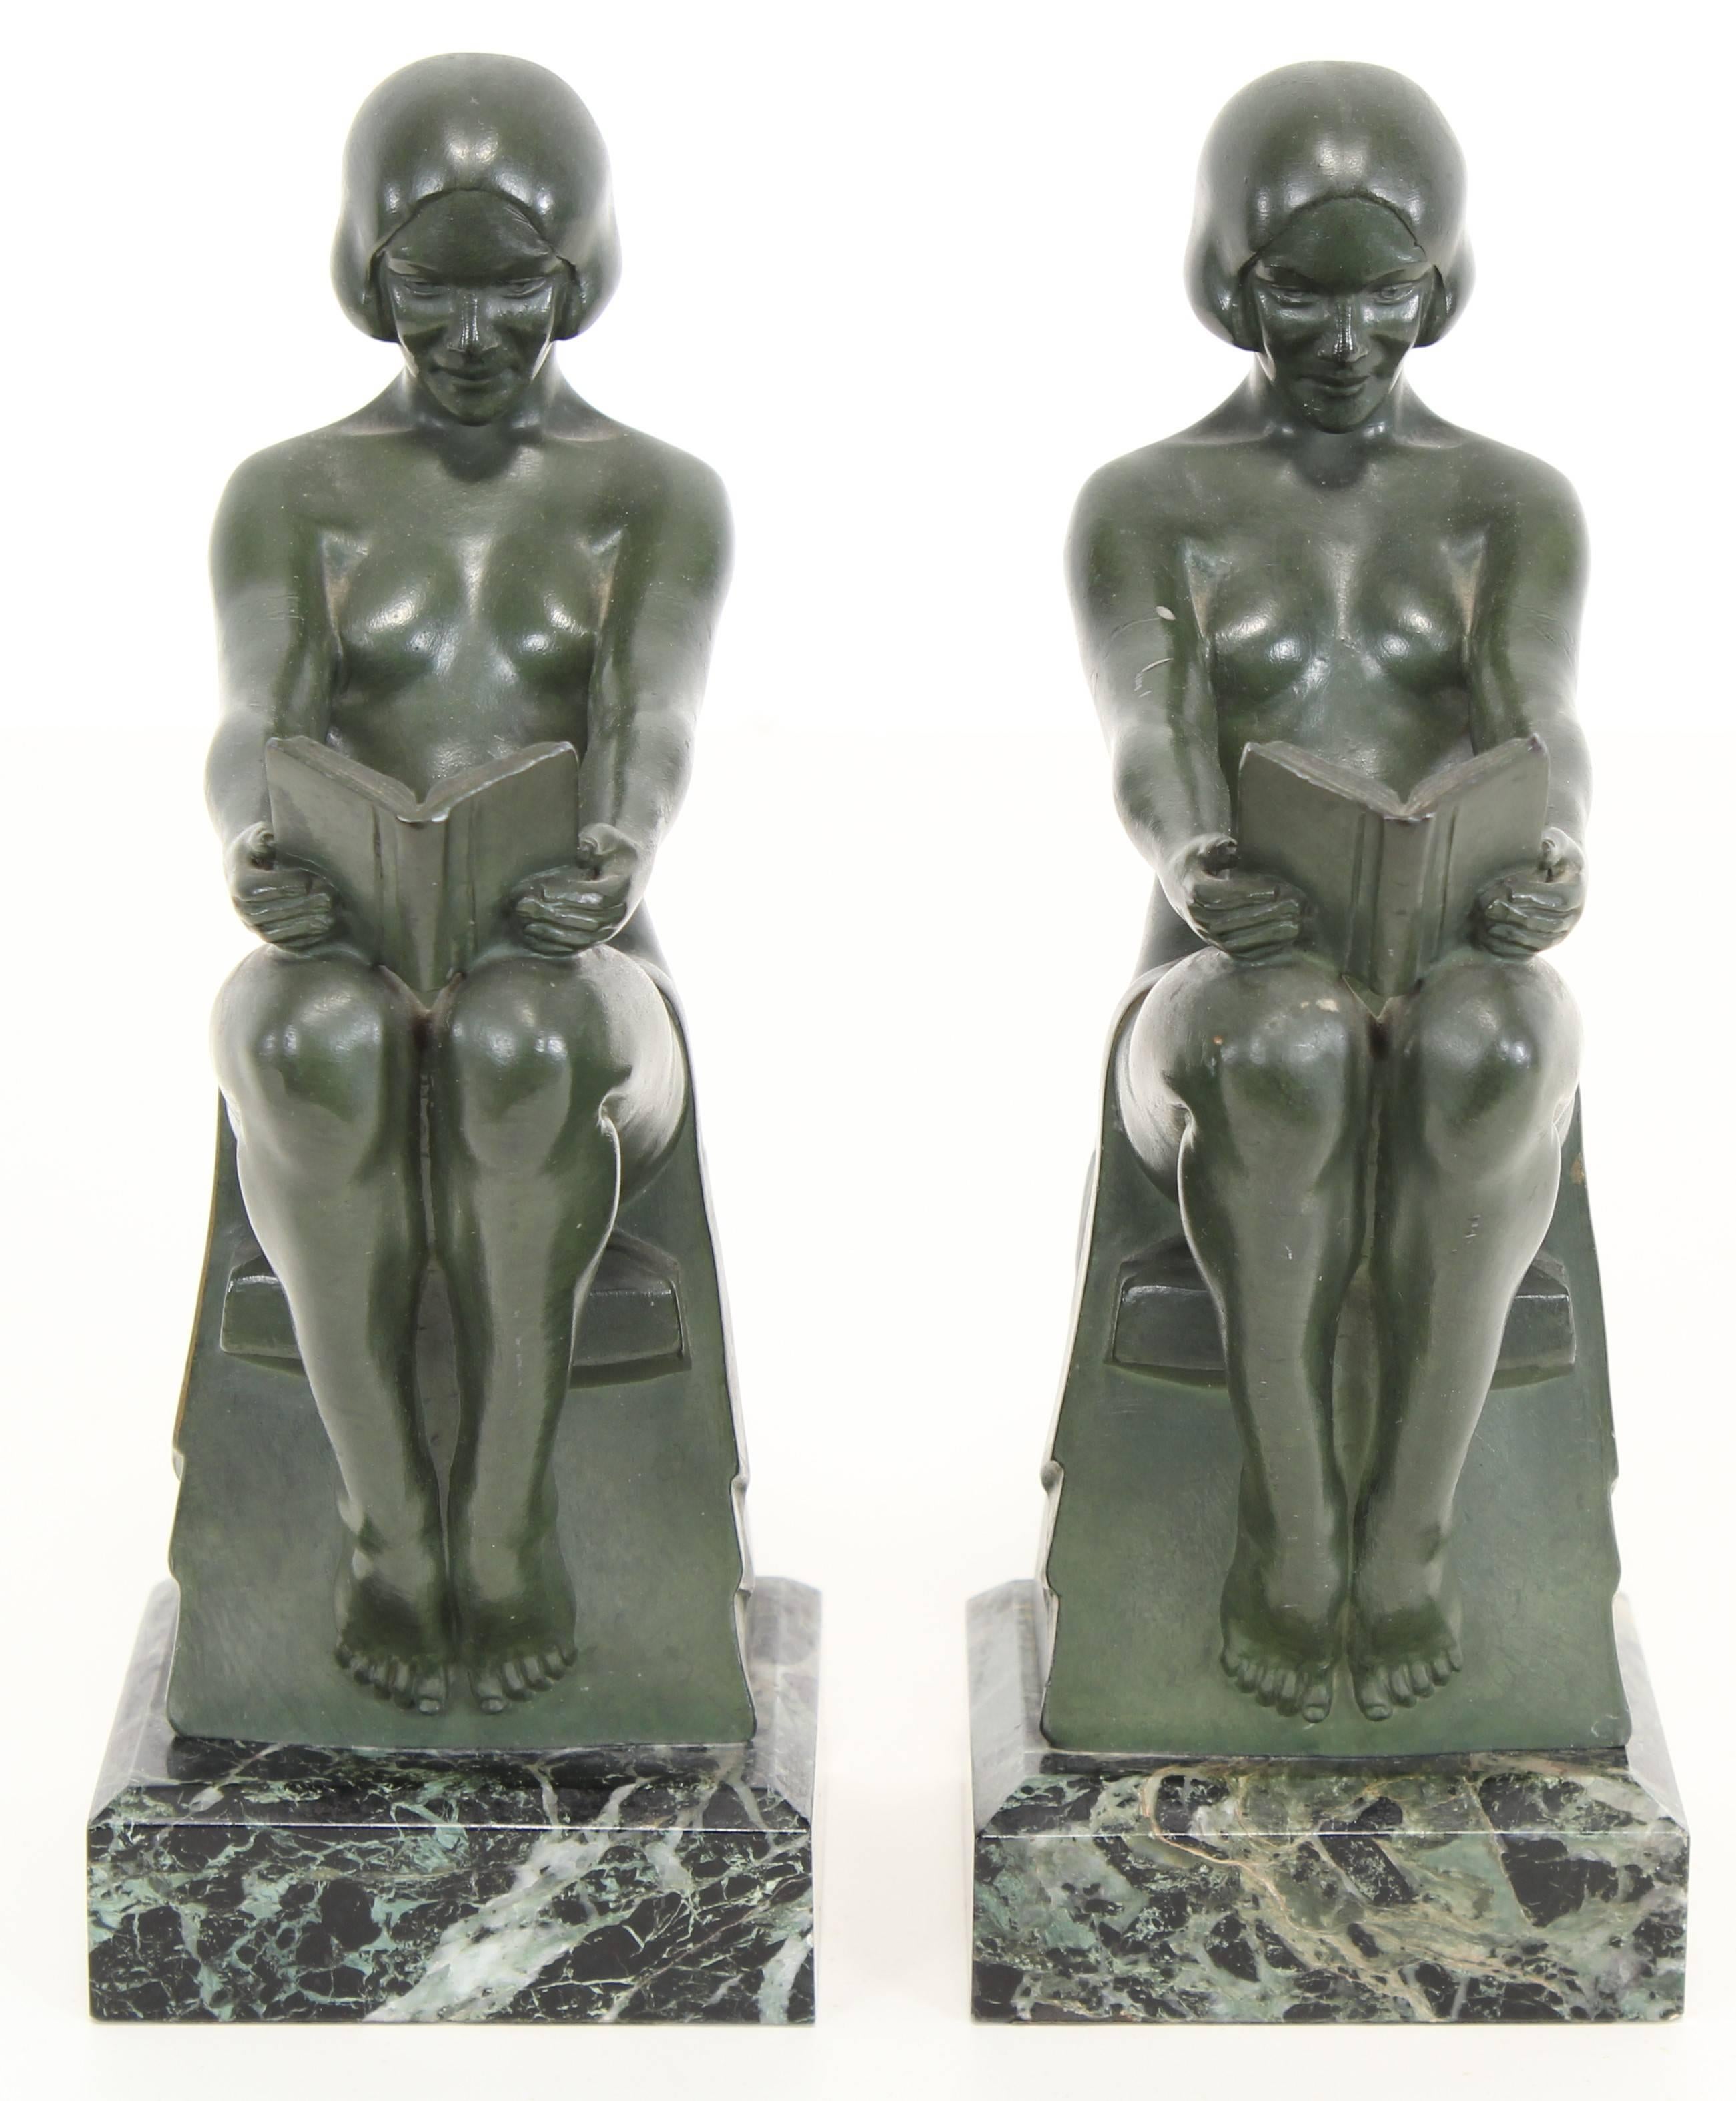 A fabulous pair of Art Deco nude bookends signed by French artist Max Le Verrier. Original bronze toned Verdi green finish on a variegated marble base. They are in very good condition. Slight wear to finish on one arm, as shown in images.